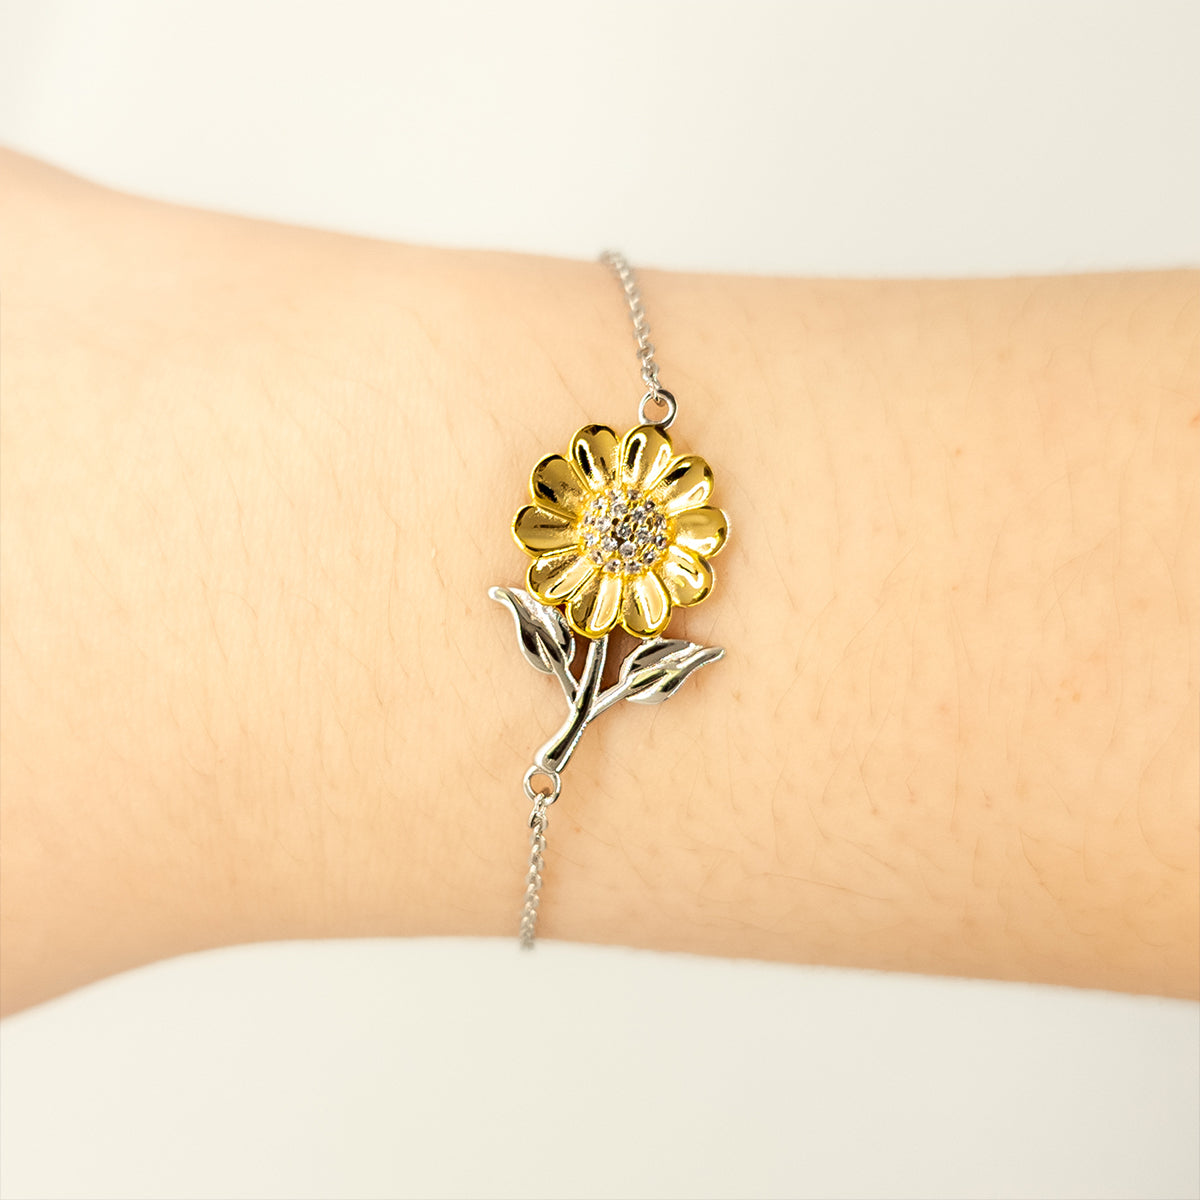 Big-Brother Sunflower Bracelet - Always in my Heart - Unique Gift for Birthday or Graduation